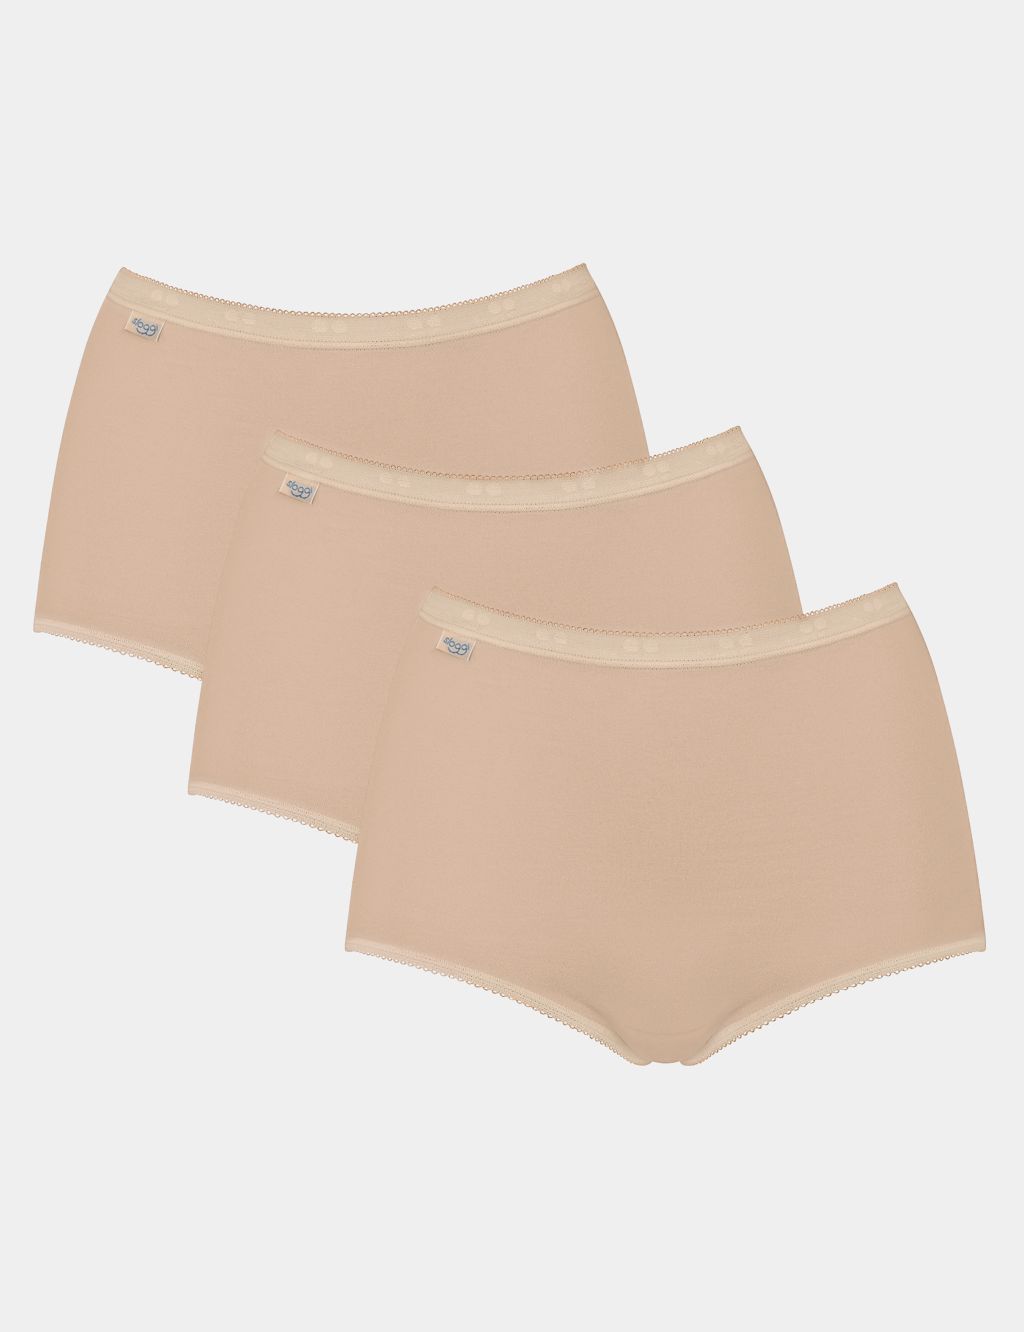 3 pack of midi briefs in beige, red and white